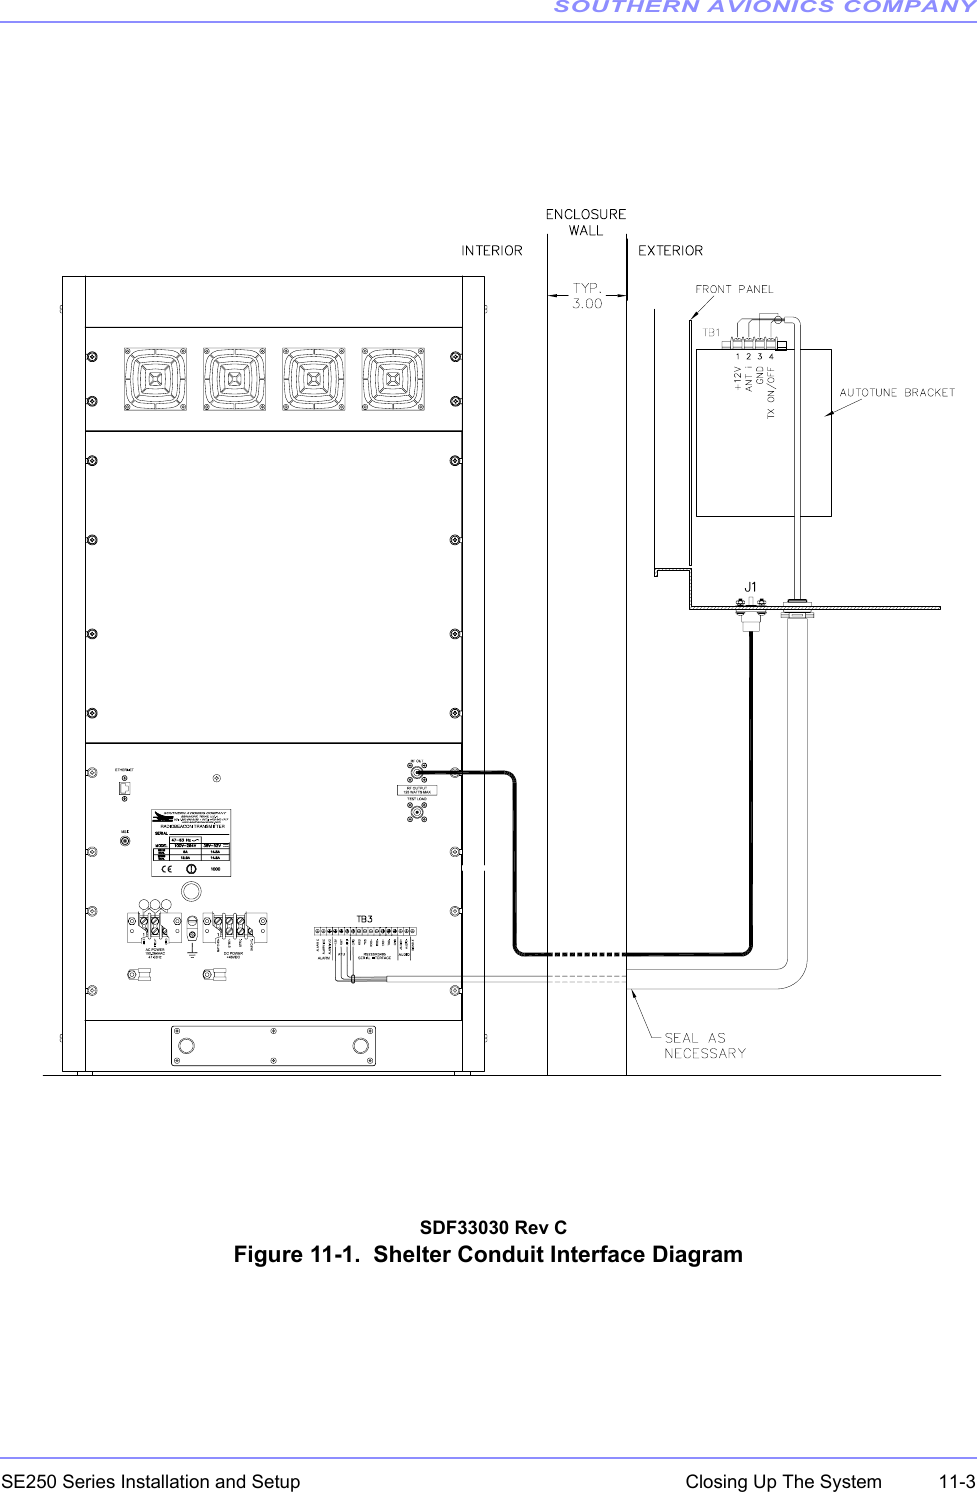 SOUTHERN AVIONICS COMPANYSE250 Series Installation and Setup  11-3Closing Up The System  SDF33030 Rev CFigure 11-1.  Shelter Conduit Interface Diagram 